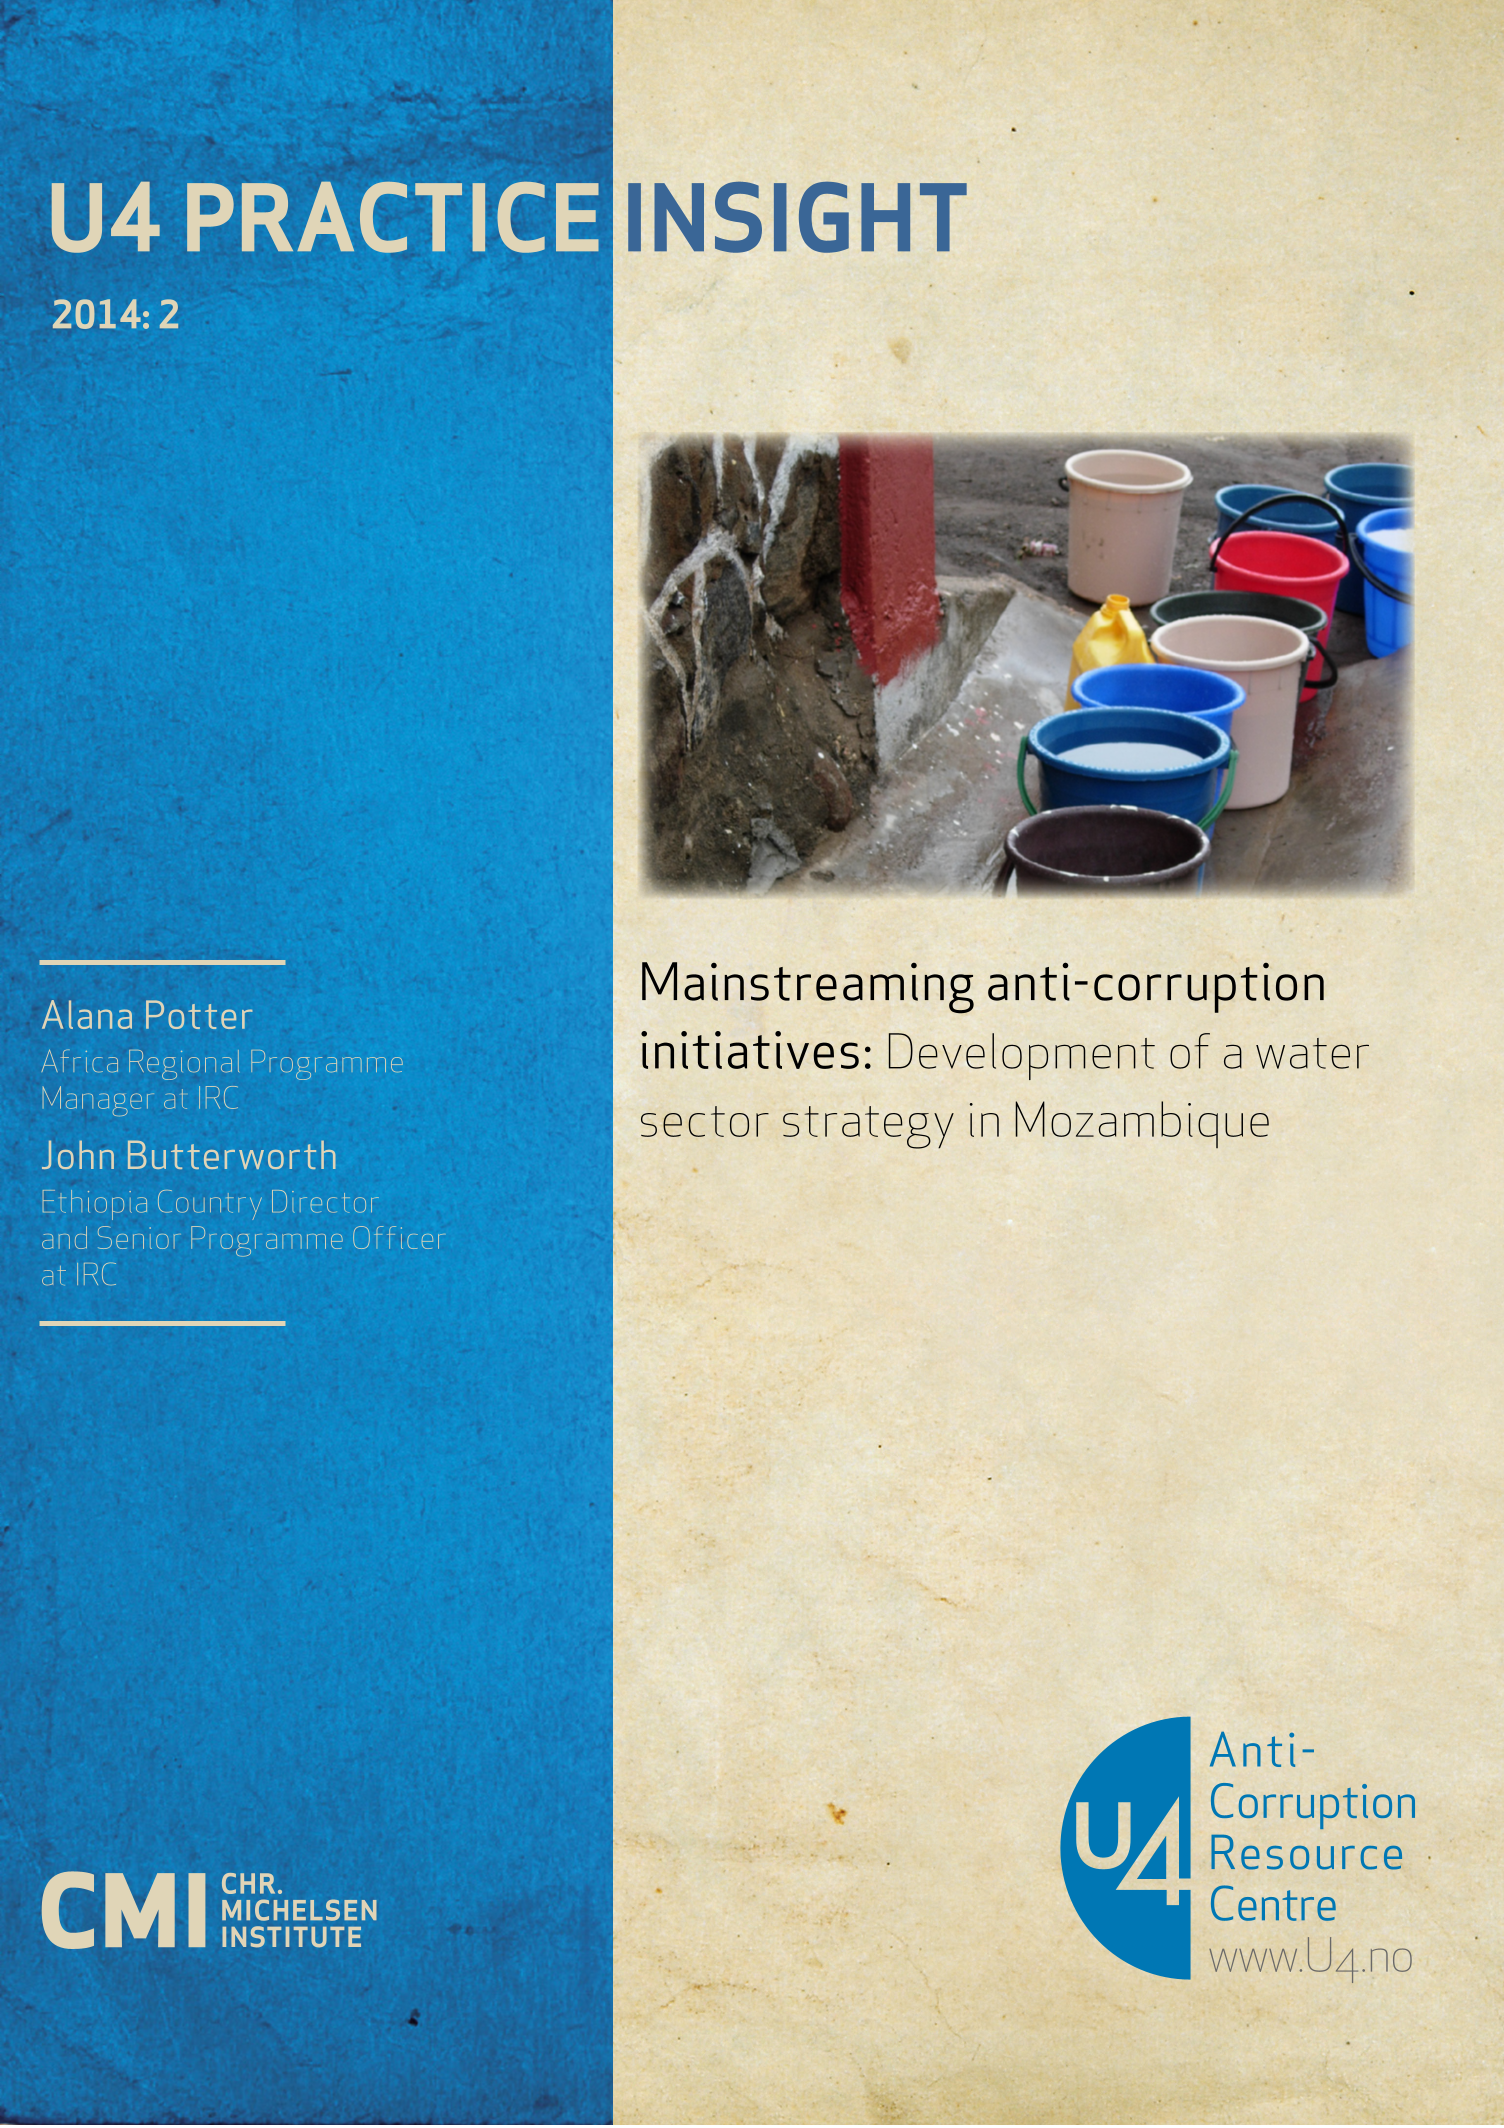 Mainstreaming anti-corruption initiatives: Development of a water sector strategy in Mozambique